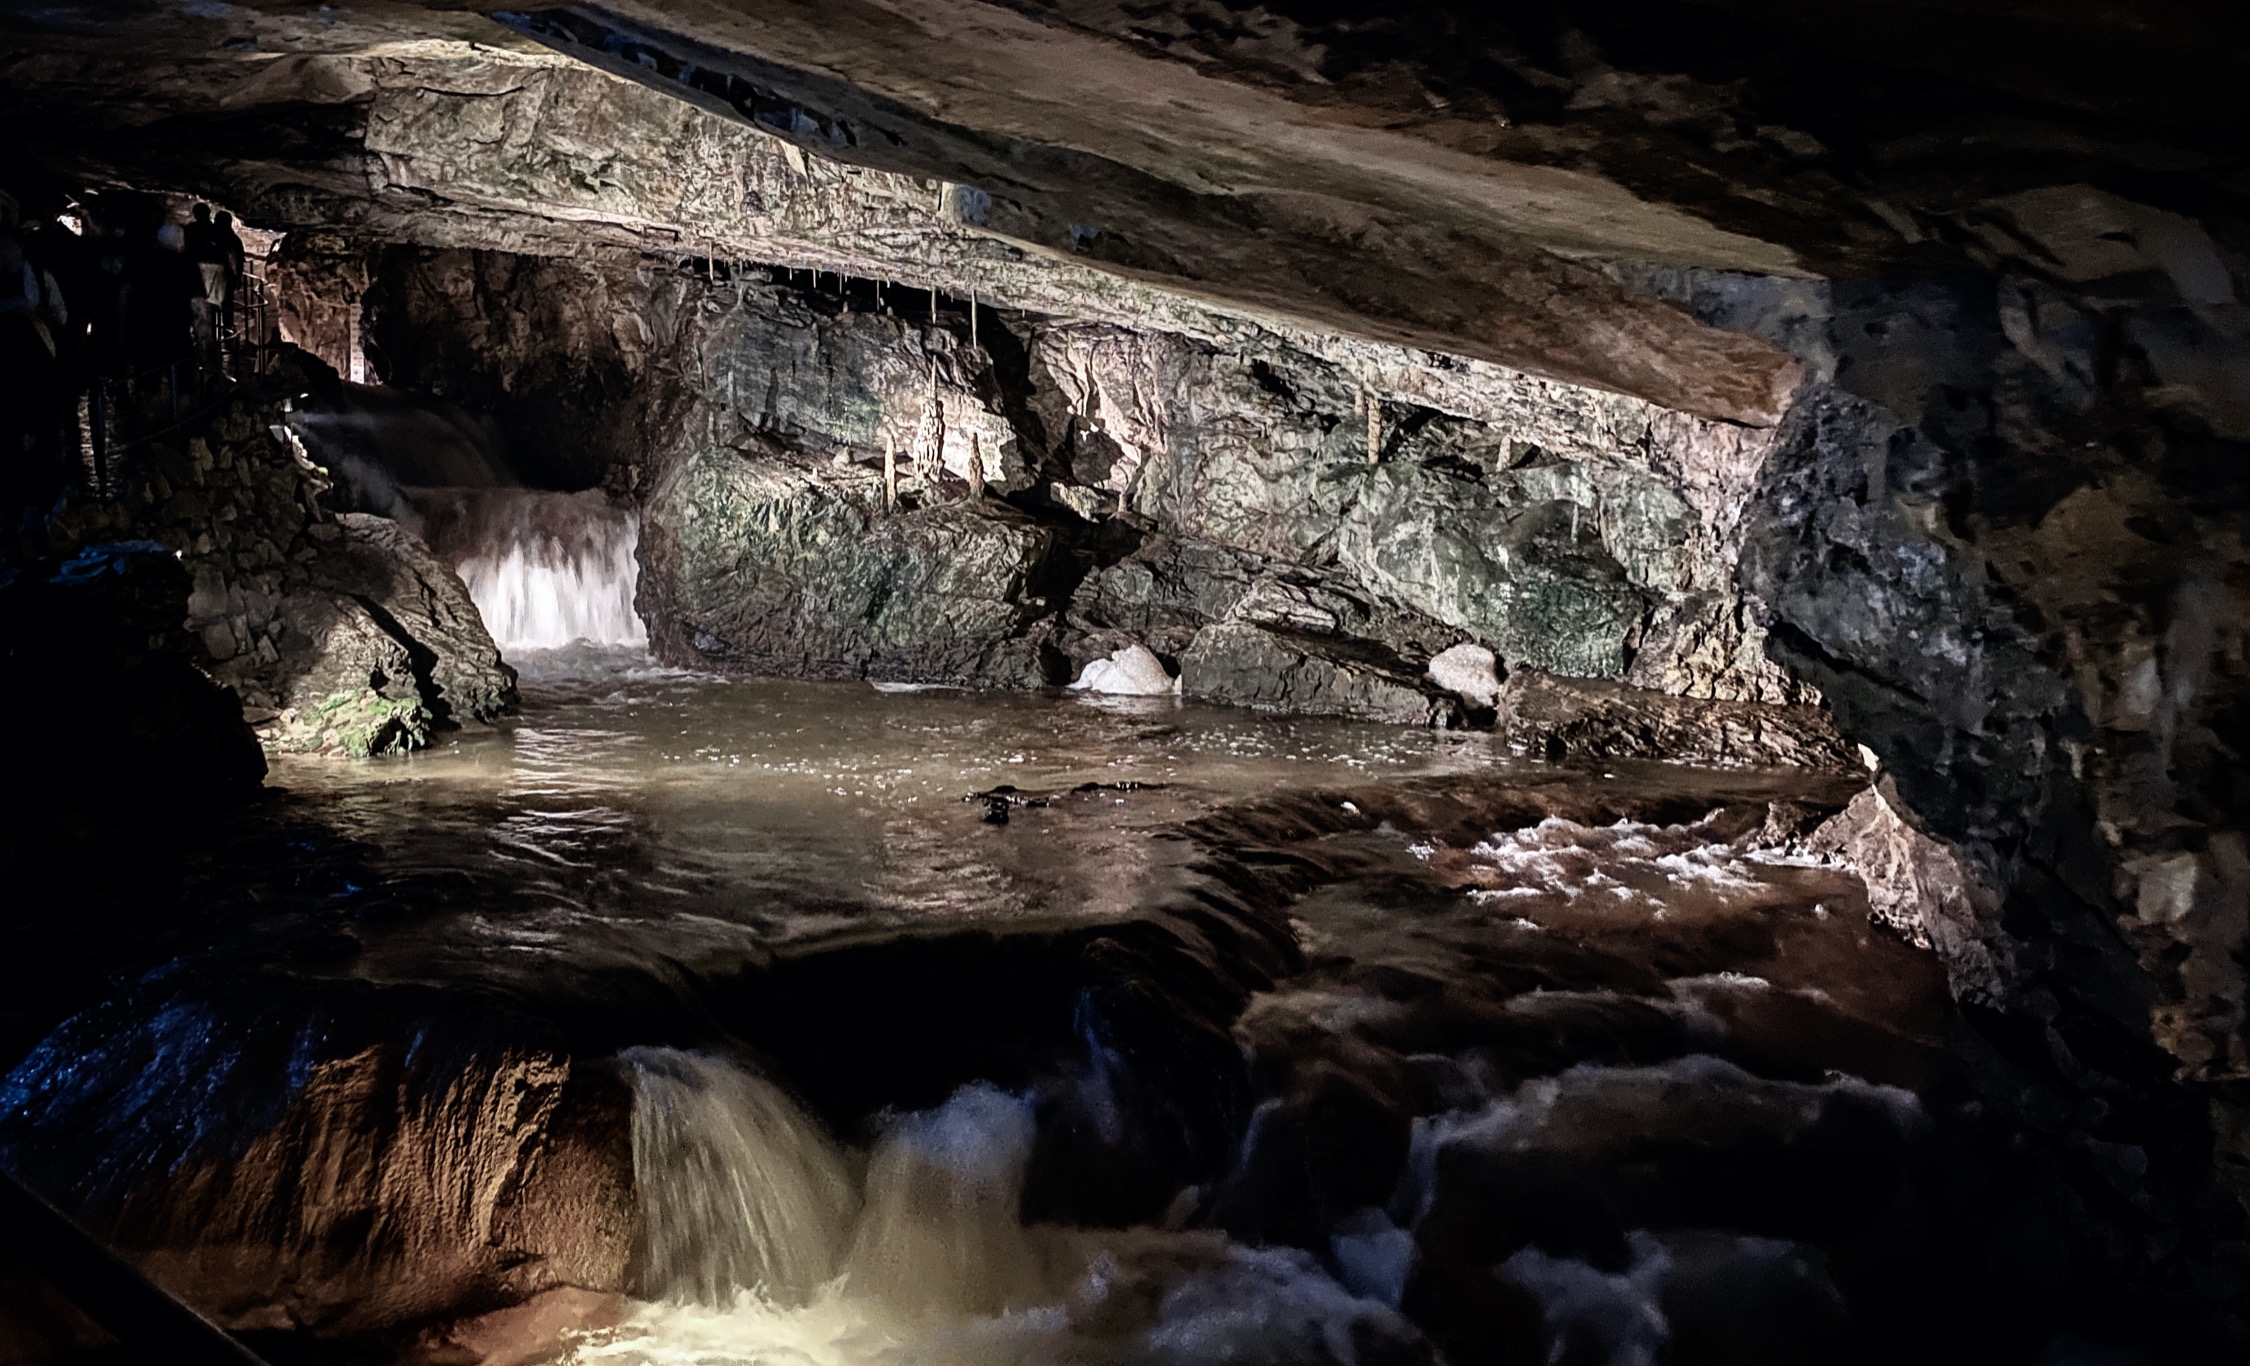 St. Beatus Caves – Dragon’s Hideout In A Swiss Cave System